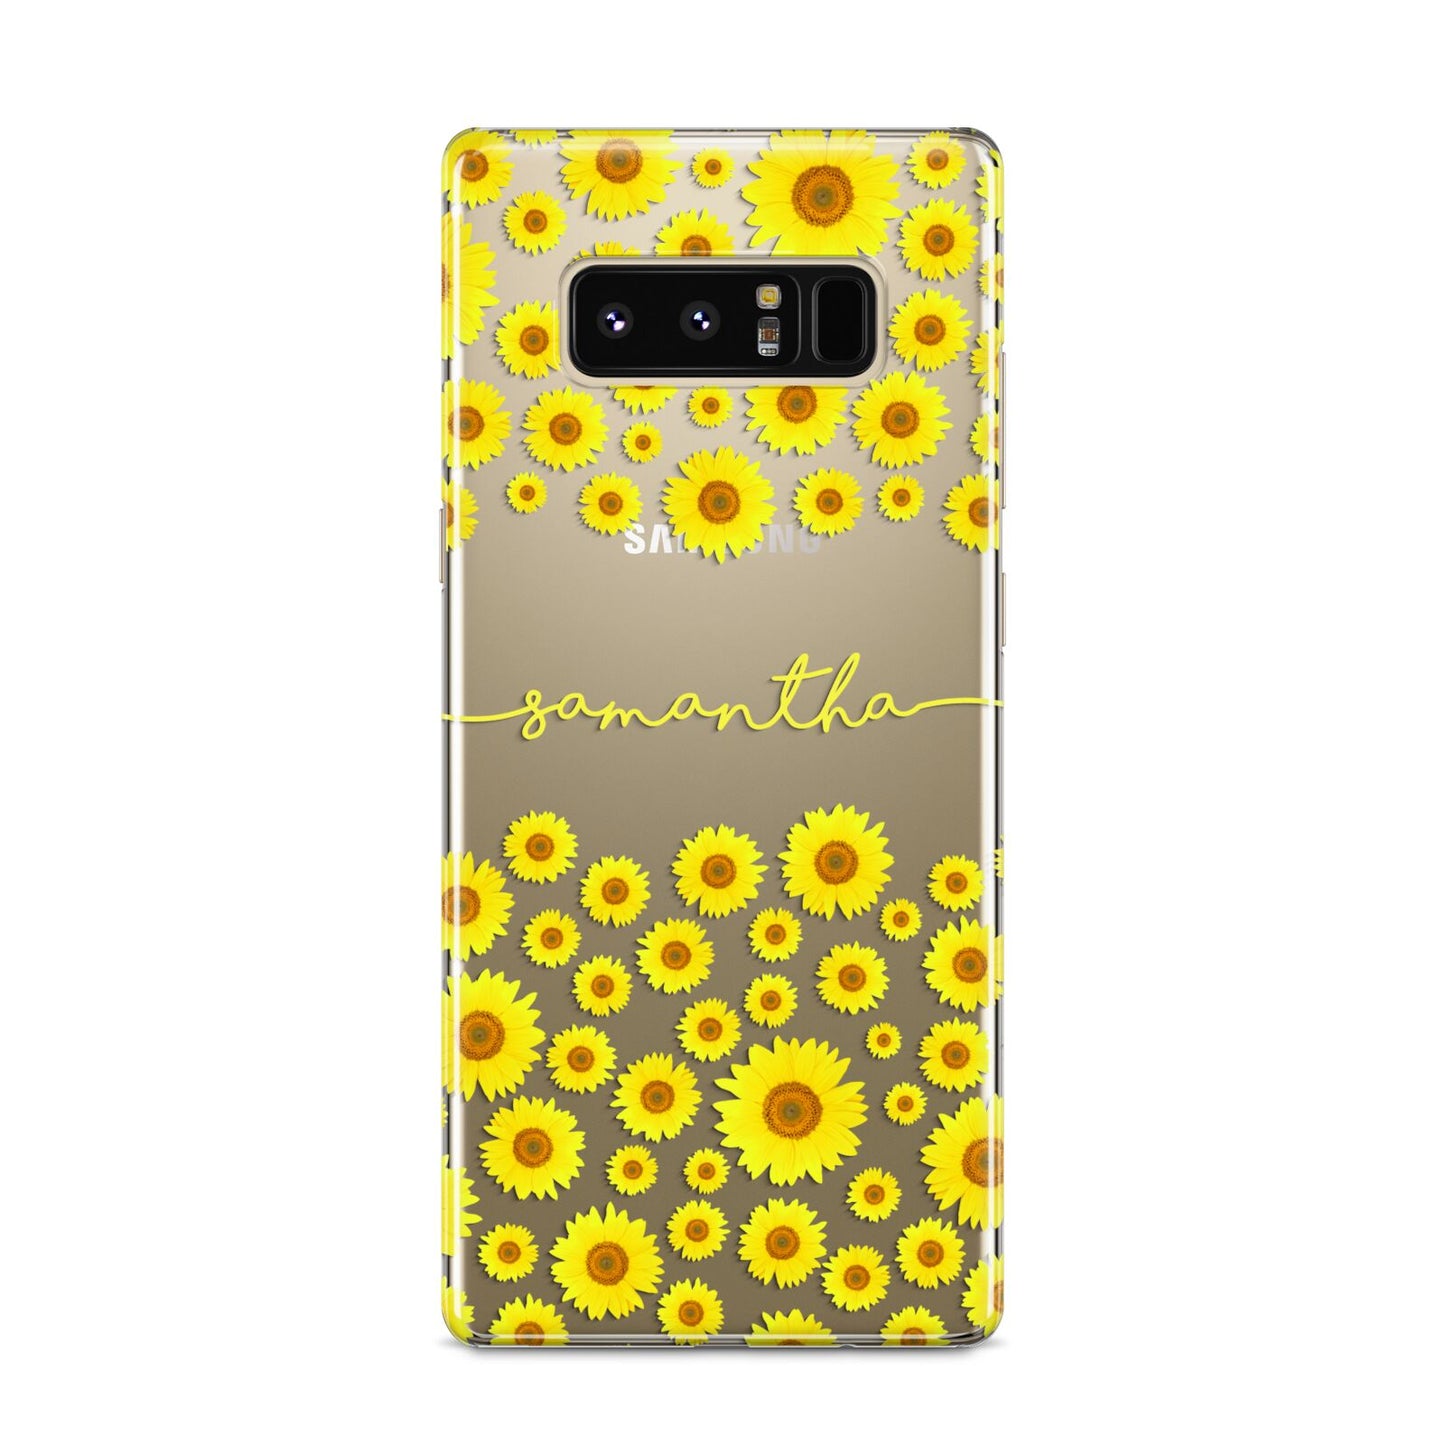 Personalised Sunflower Samsung Galaxy S8 Case